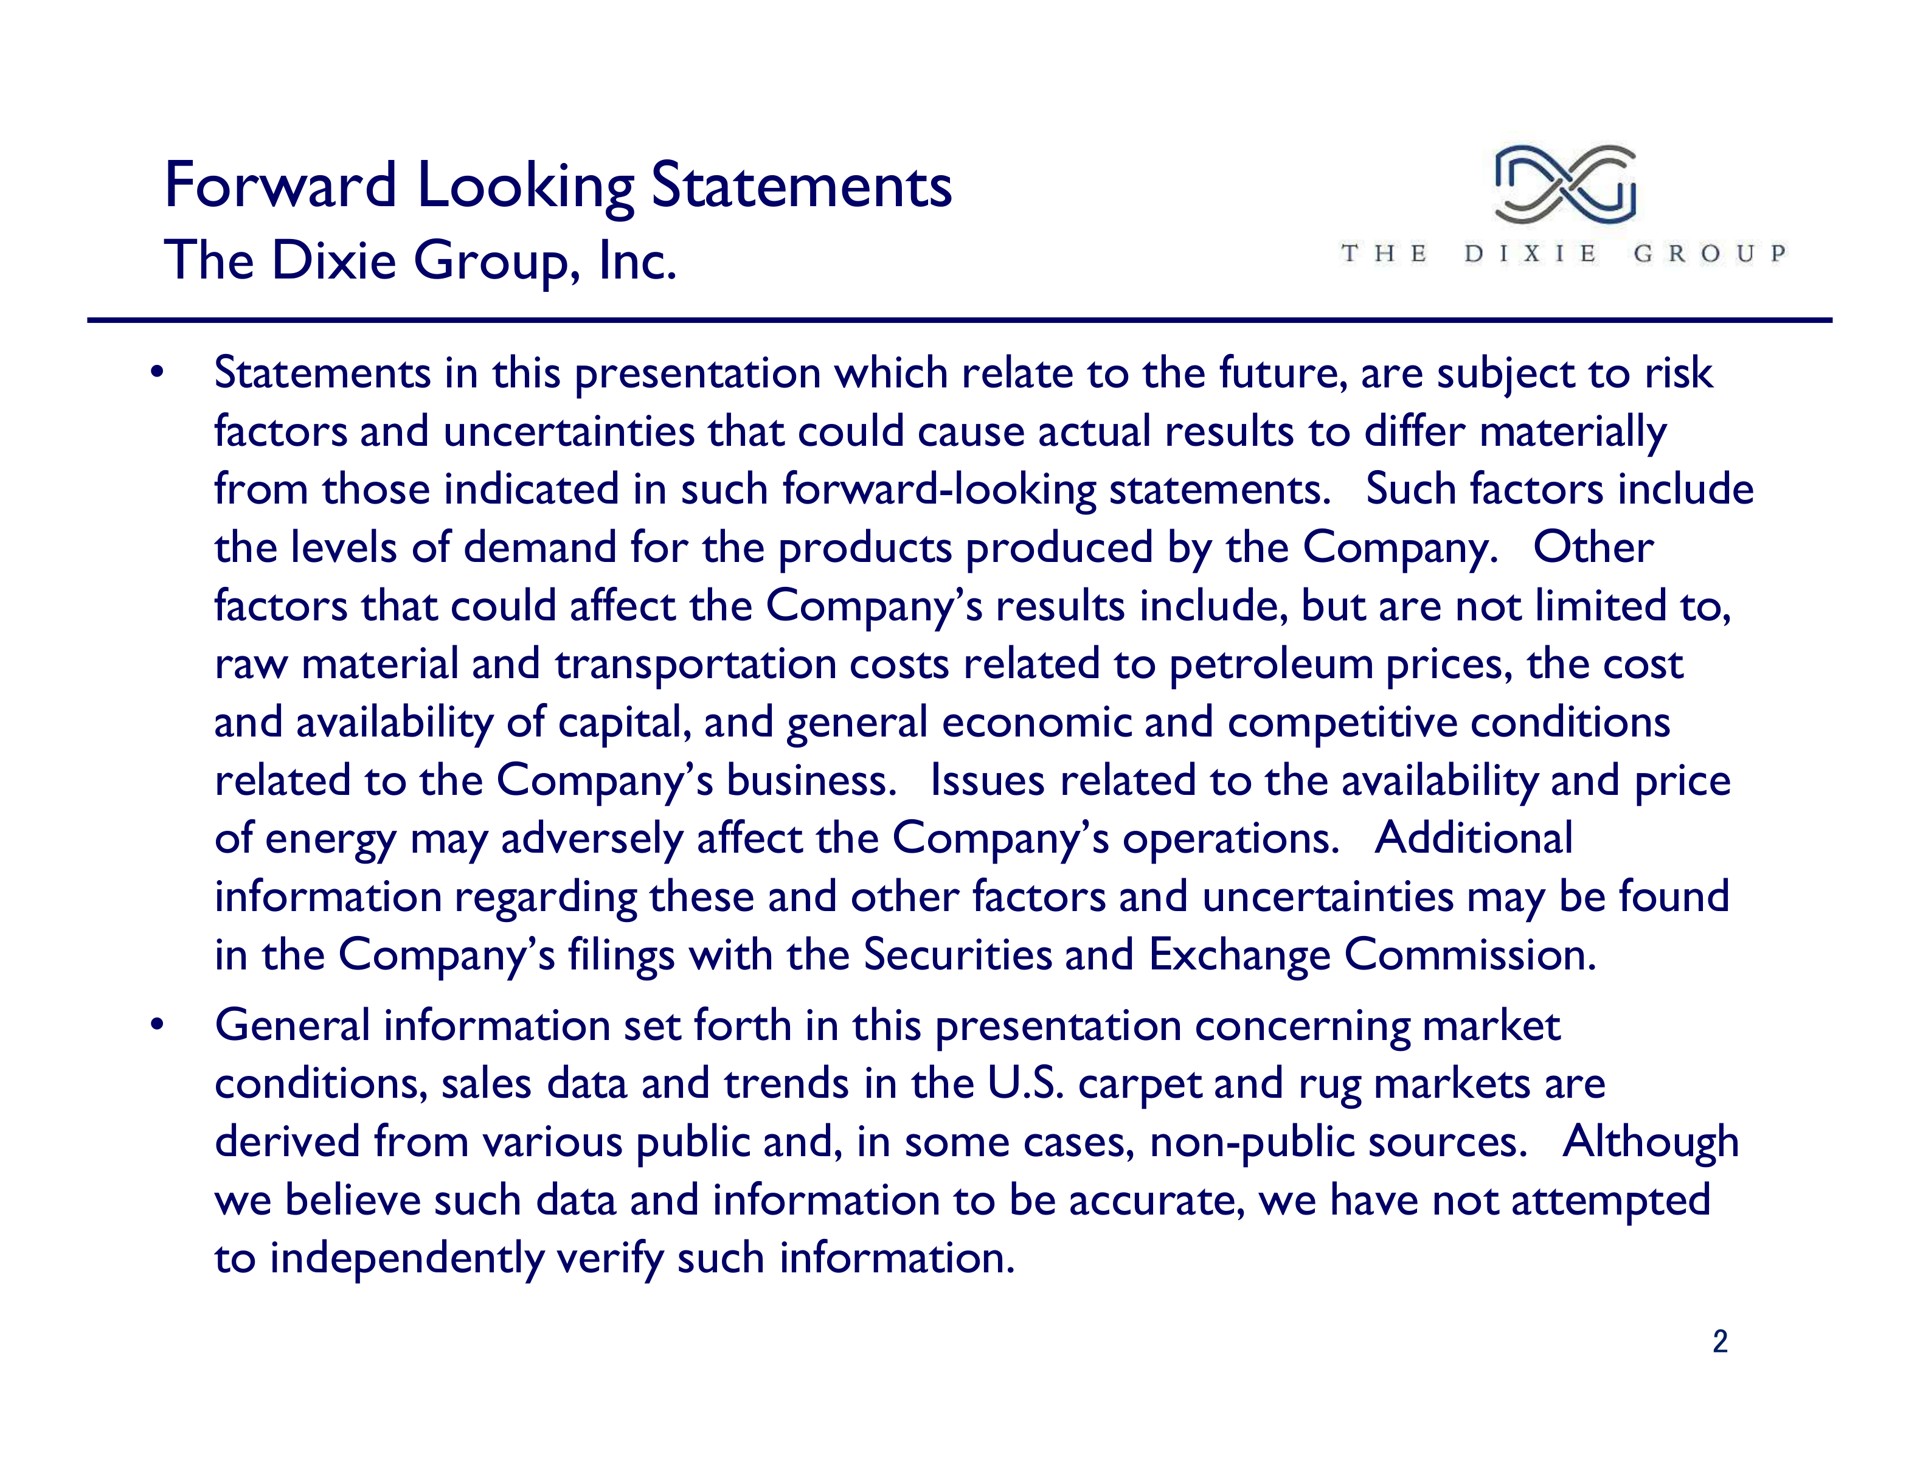 forward looking statements the dixie group the dixie group | The Dixie Group